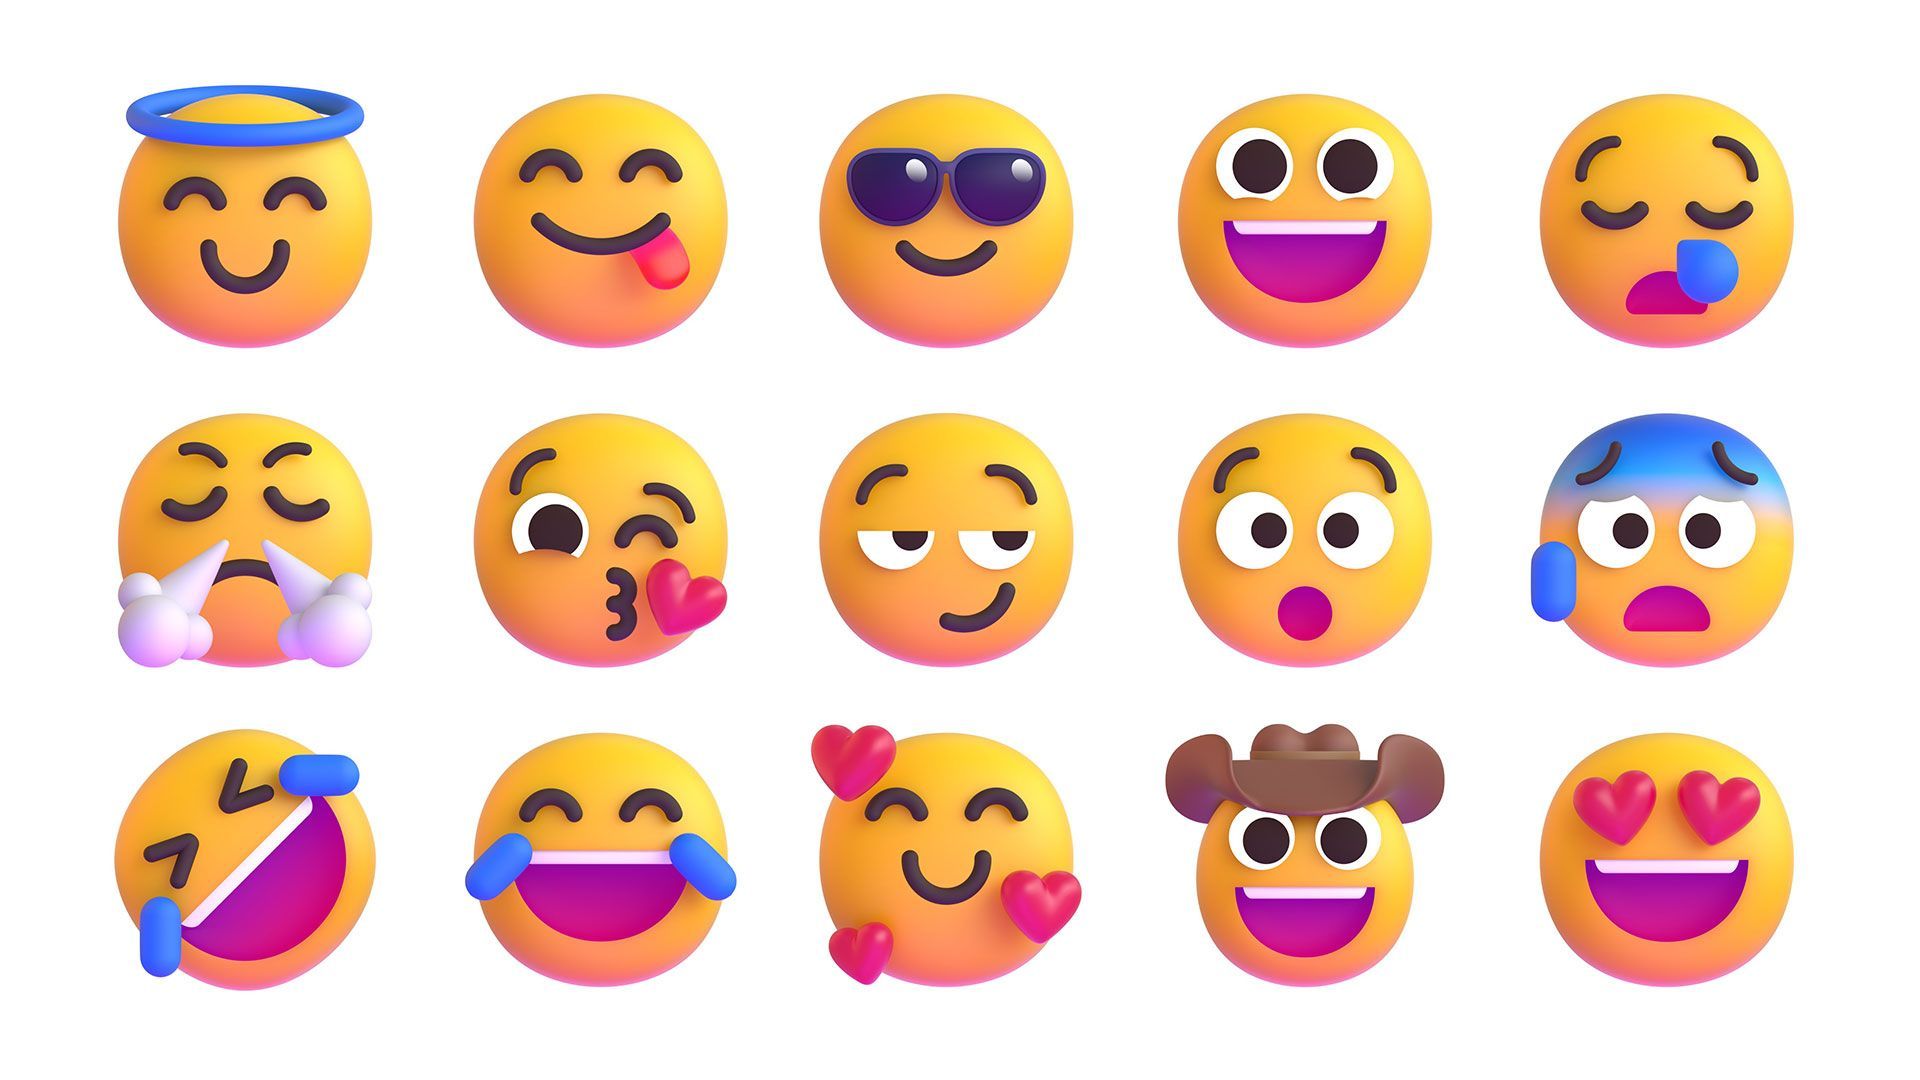 When is Microsoft's Fluent Emoji Update Coming Out?